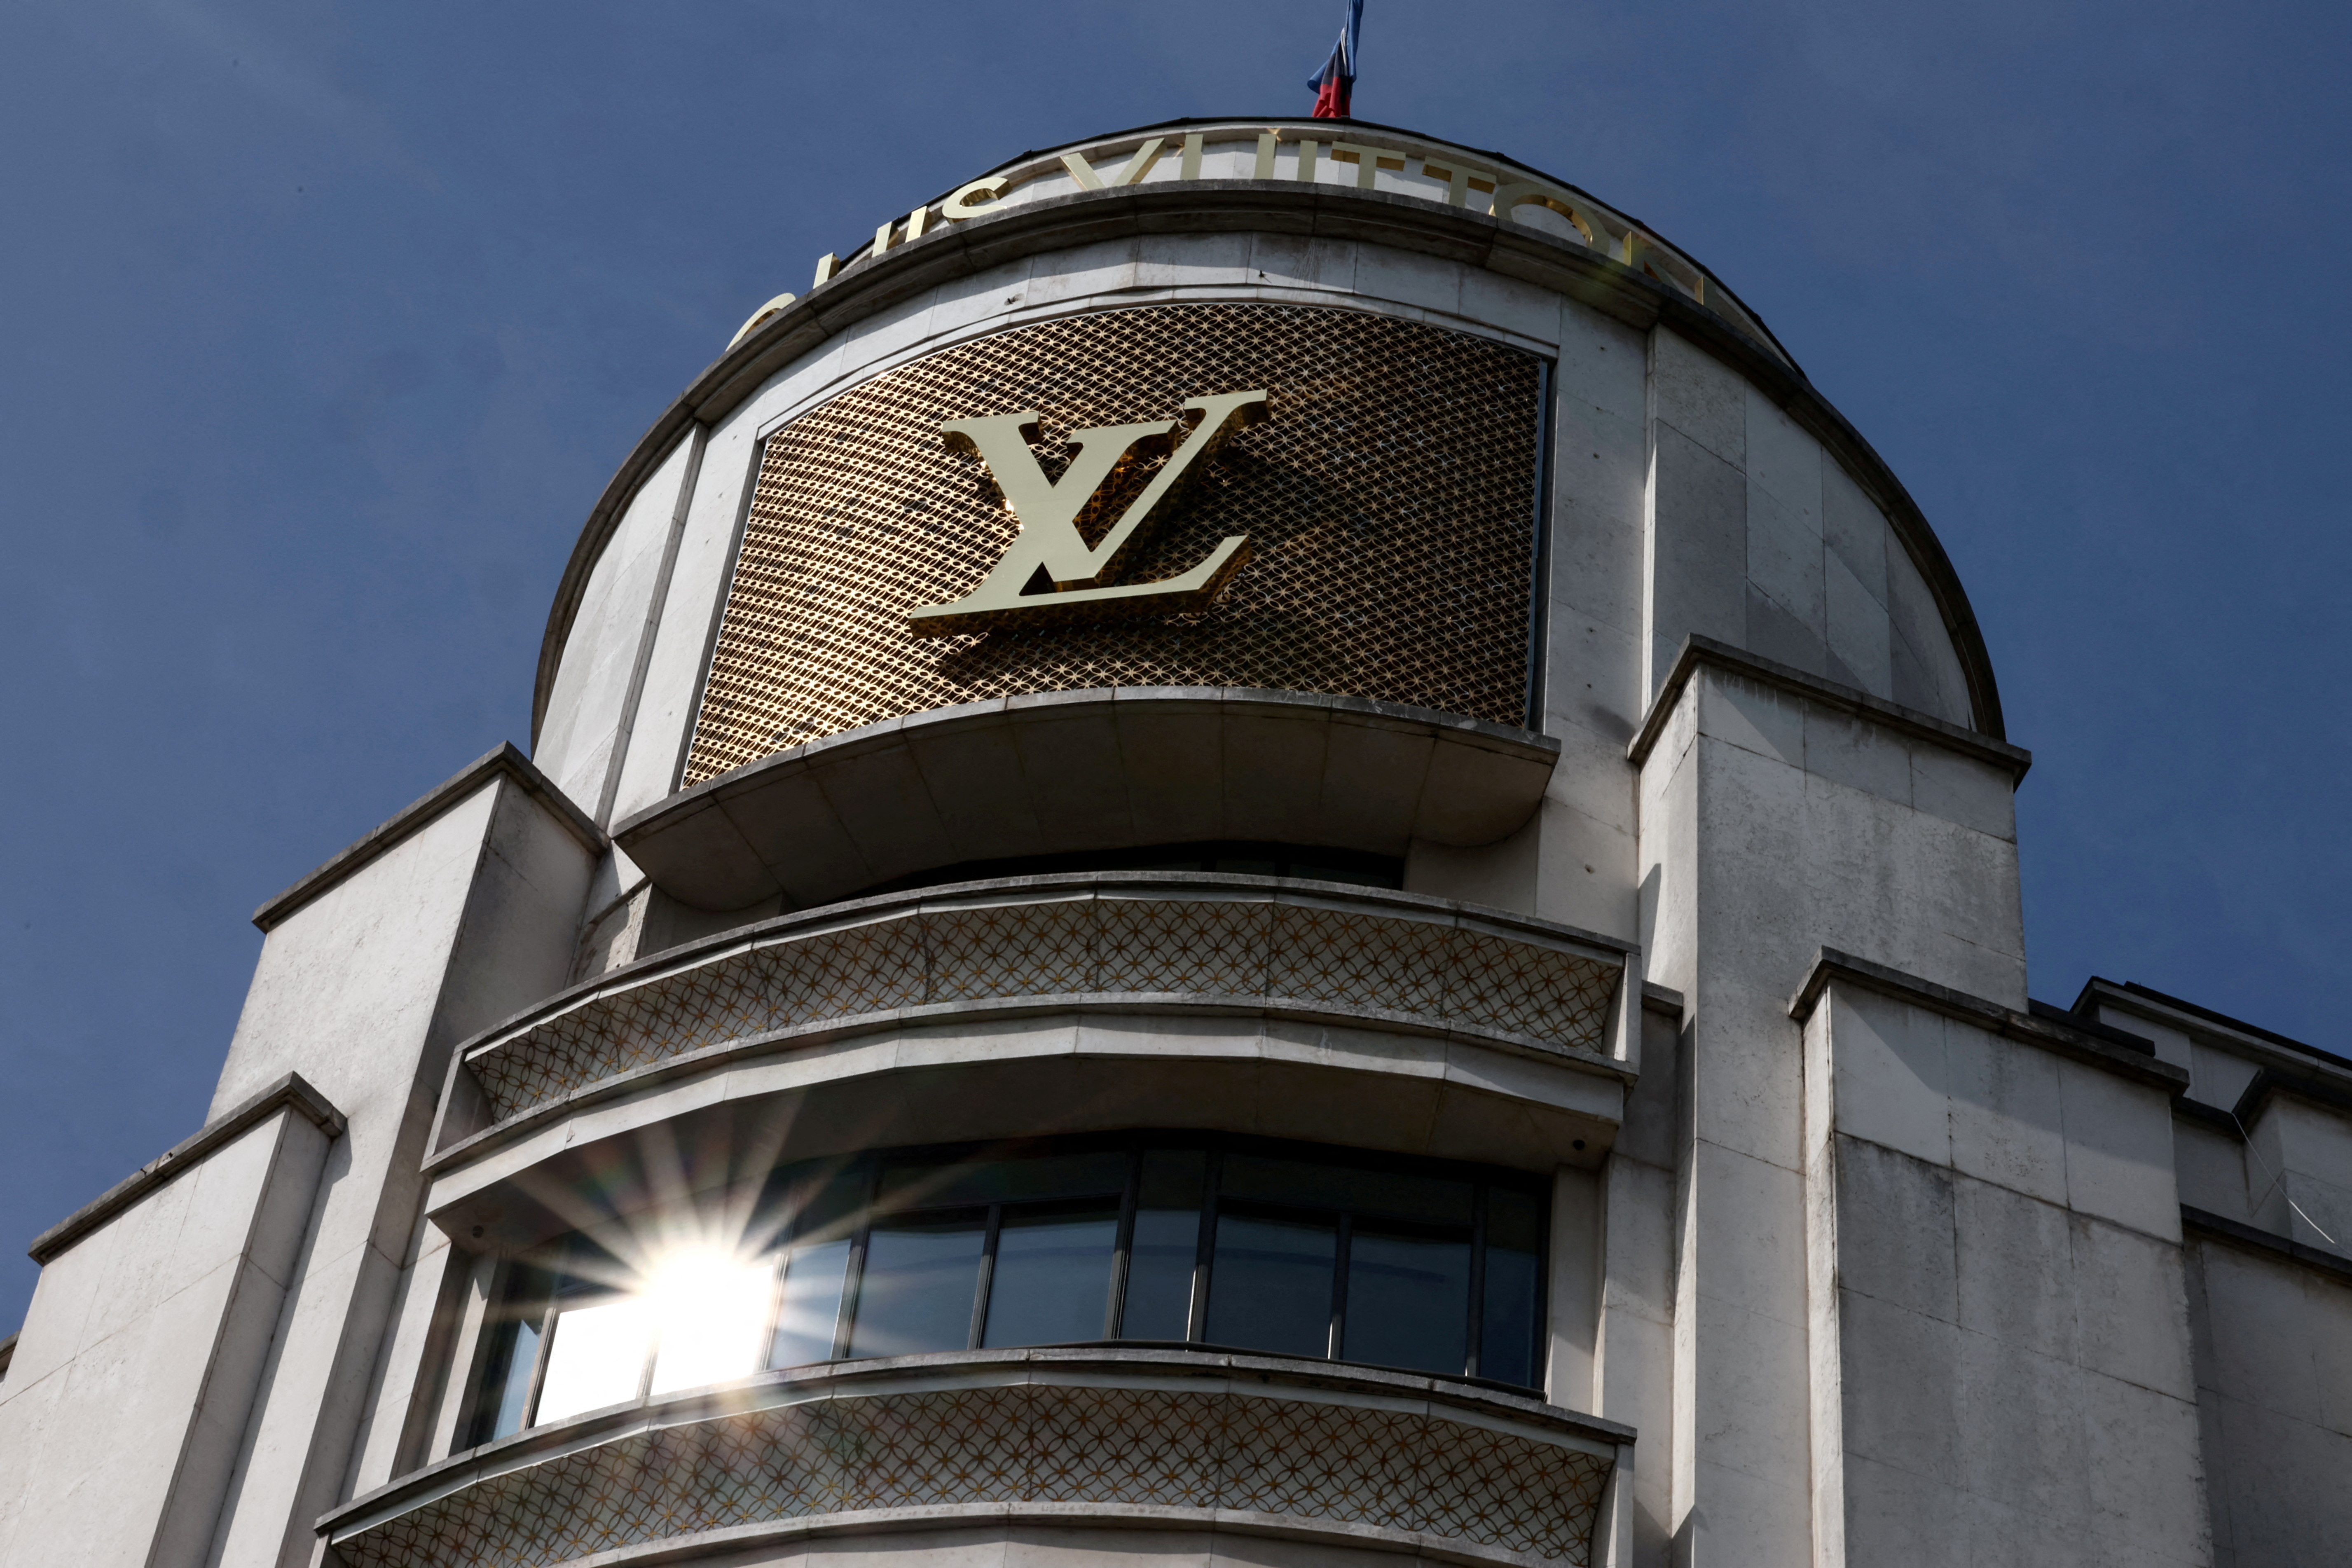 A slowdown for Richemont and Burberry, while LVMH booms